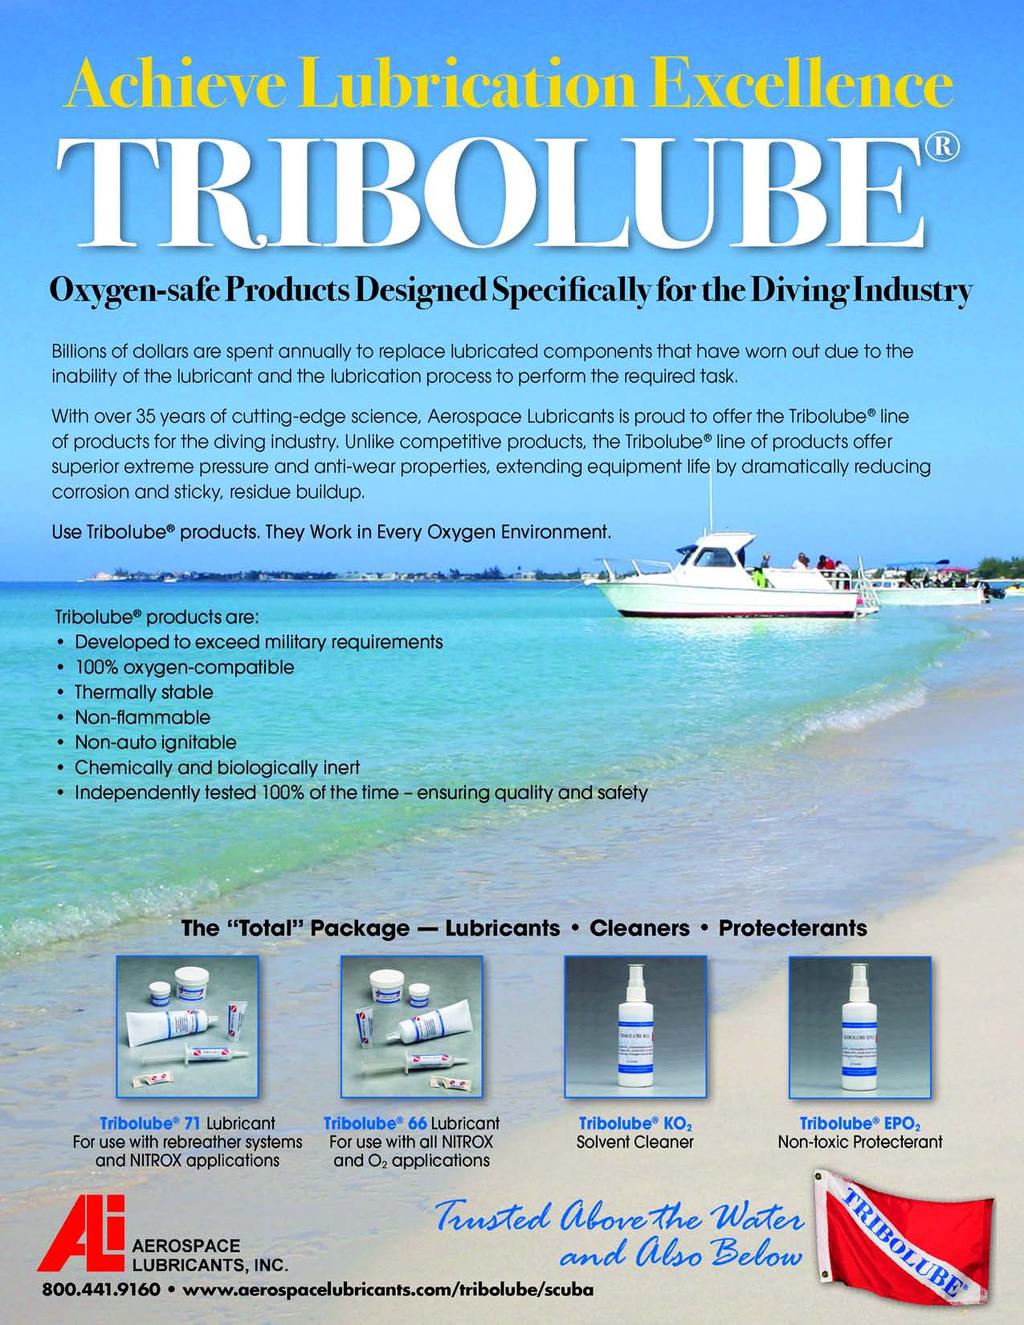 Tribolube 66 is a replacement for Christolube MCG 129